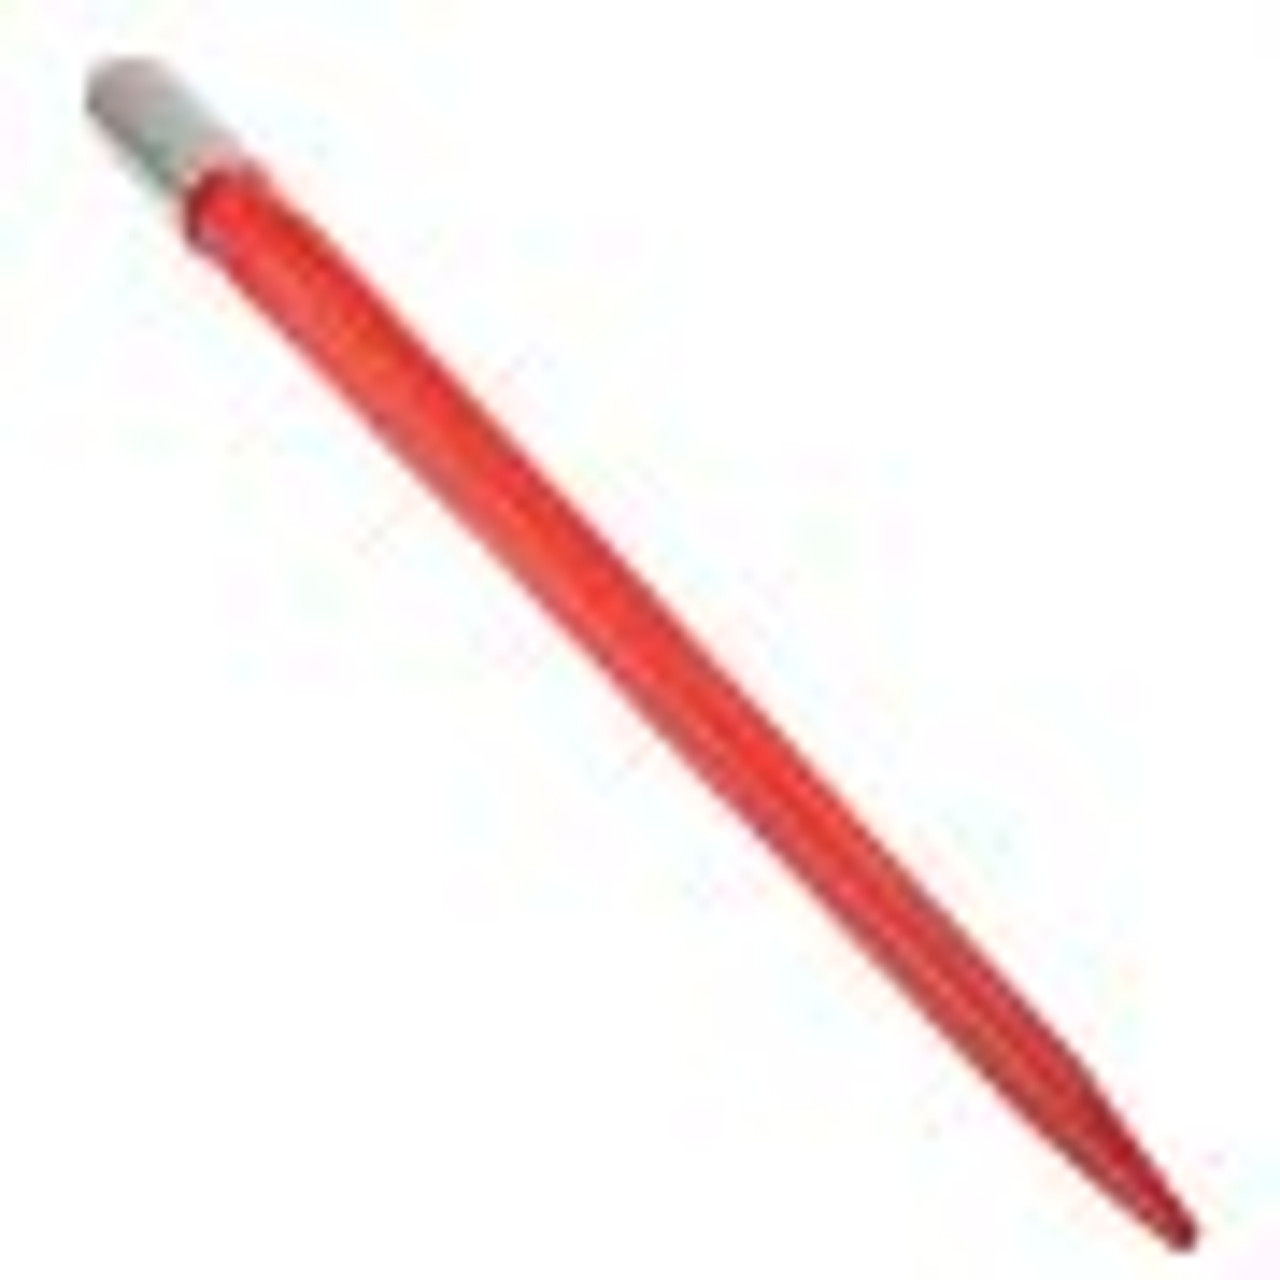 Hay Spear 32" Bale Spear 1350 lbs Capacity, Bale Spike Quick Attach Square Hay Bale Spears 1.4" Wide, Red Coated Bale Forks, Bale Hay Spike with Hex Nut & Sleeve for Buckets Tractors Loaders